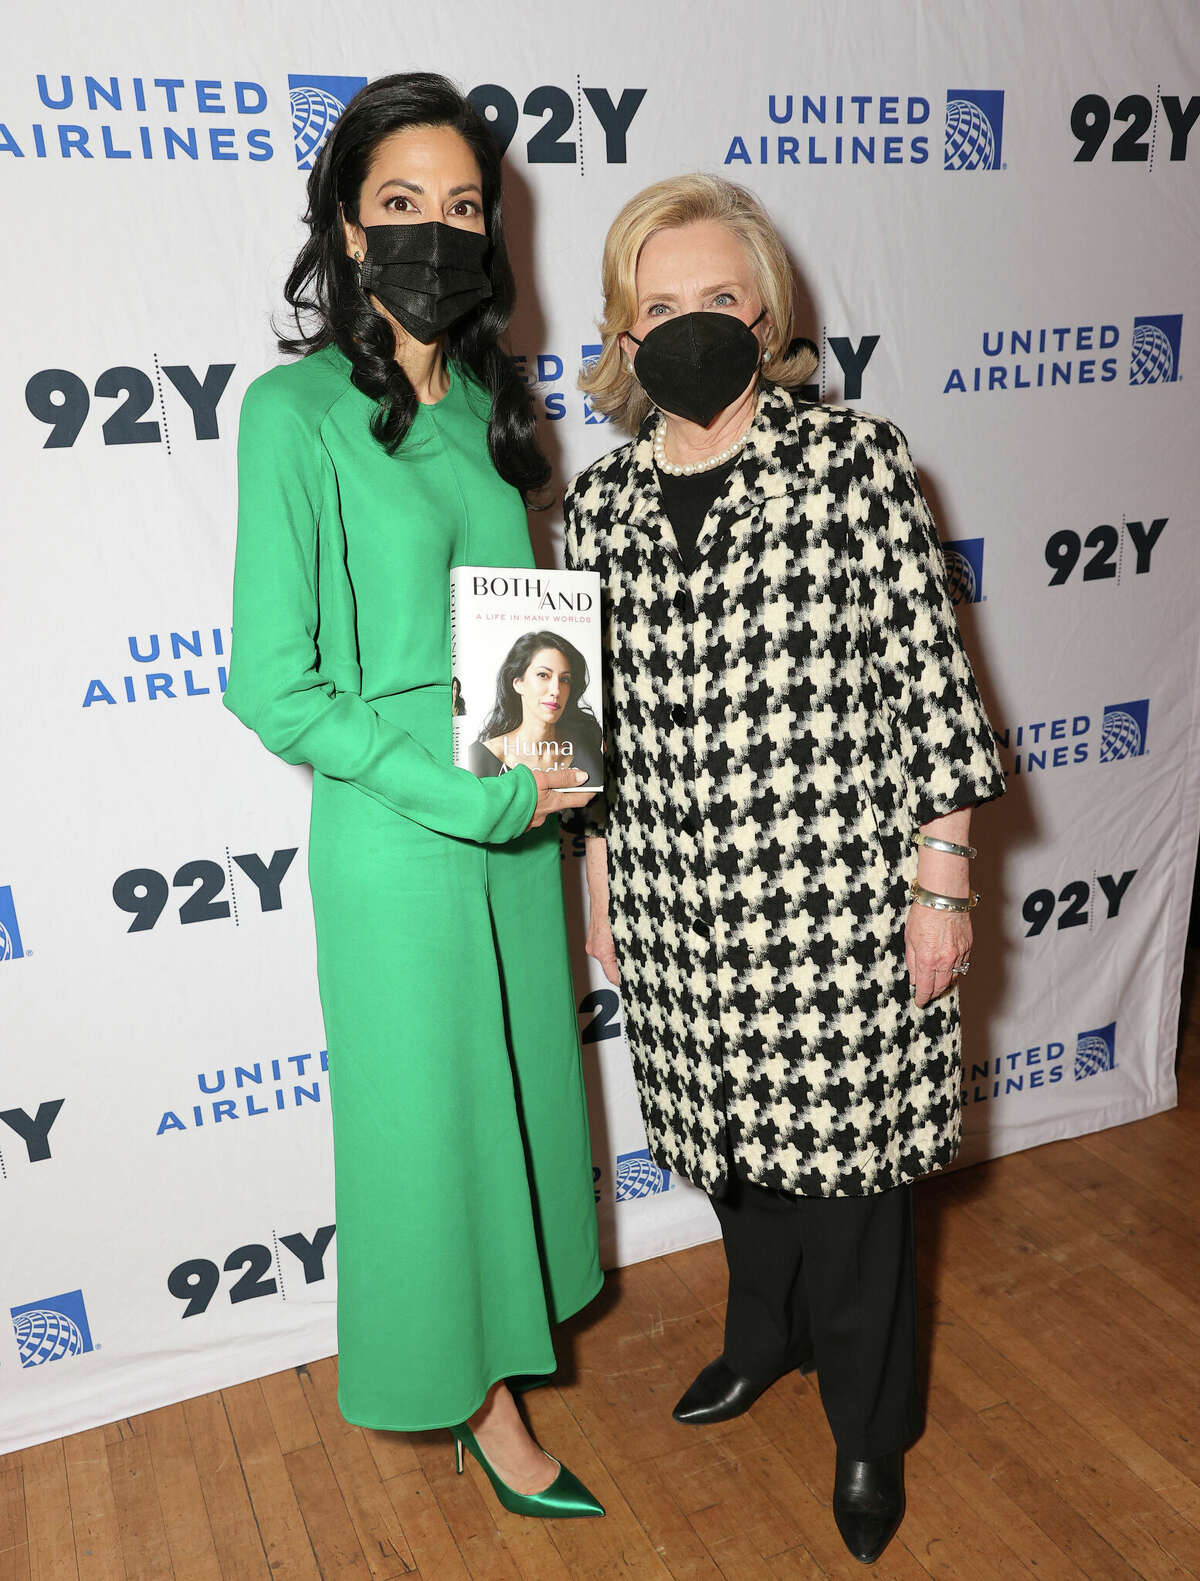 NEW YORK, NEW YORK - NOVEMBER 04: Huma Abedin and Hillary Clinton attend Huma Abedin In Conversation With Hillary Clinton at 92nd Street Y on November 04, 2021 in New York City. (Photo by Theo Wargo/Getty Images)